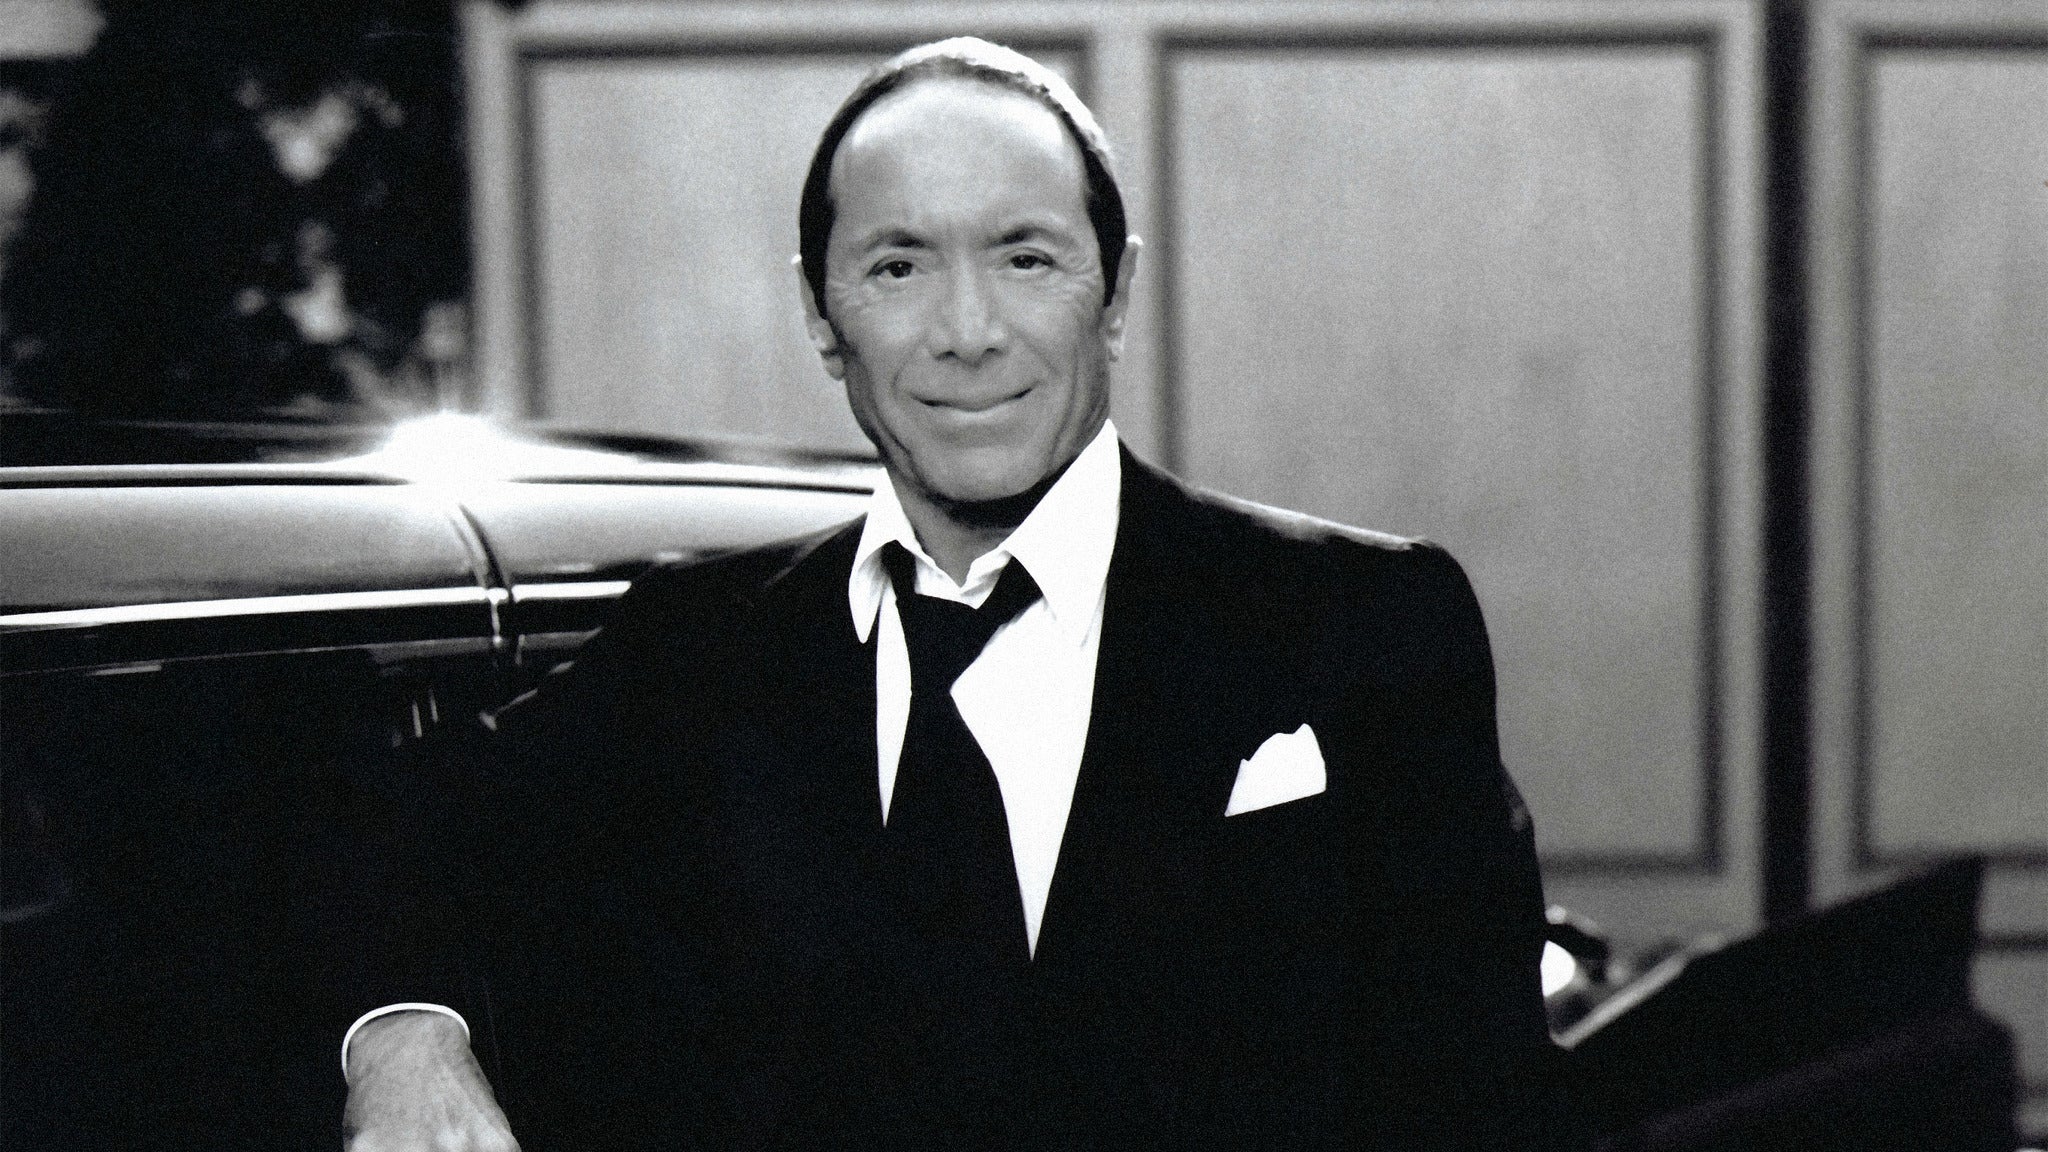 Paul Anka - Greatest Hits: His Way! presale code for approved tickets in Hollywood